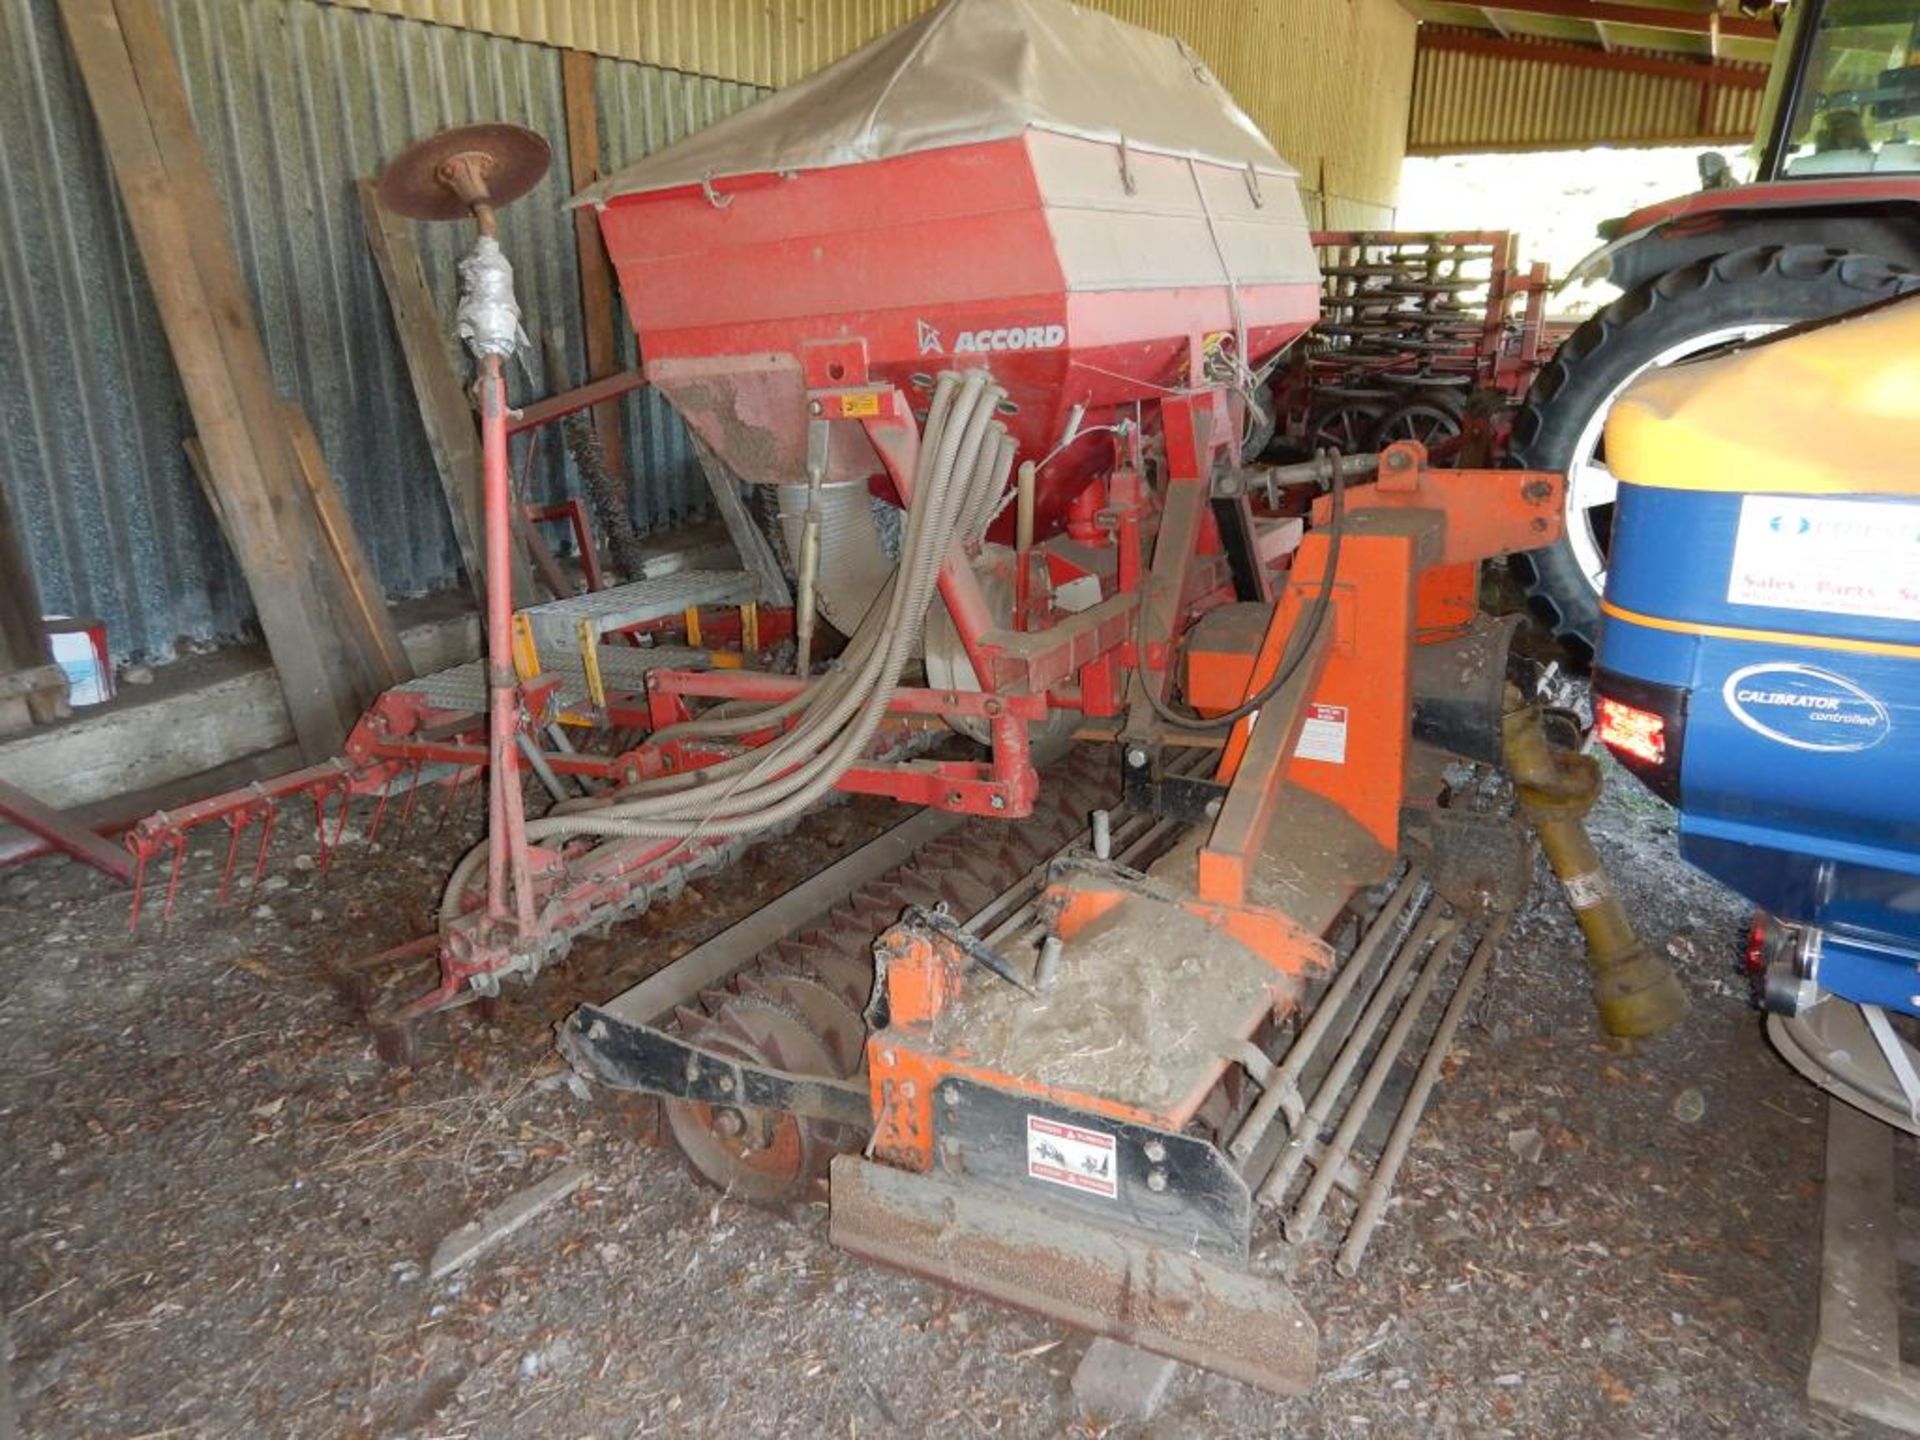 Muratori power harrow with packer roller with mounted Accord Pneumatic DA drill with bout markers, - Image 2 of 3